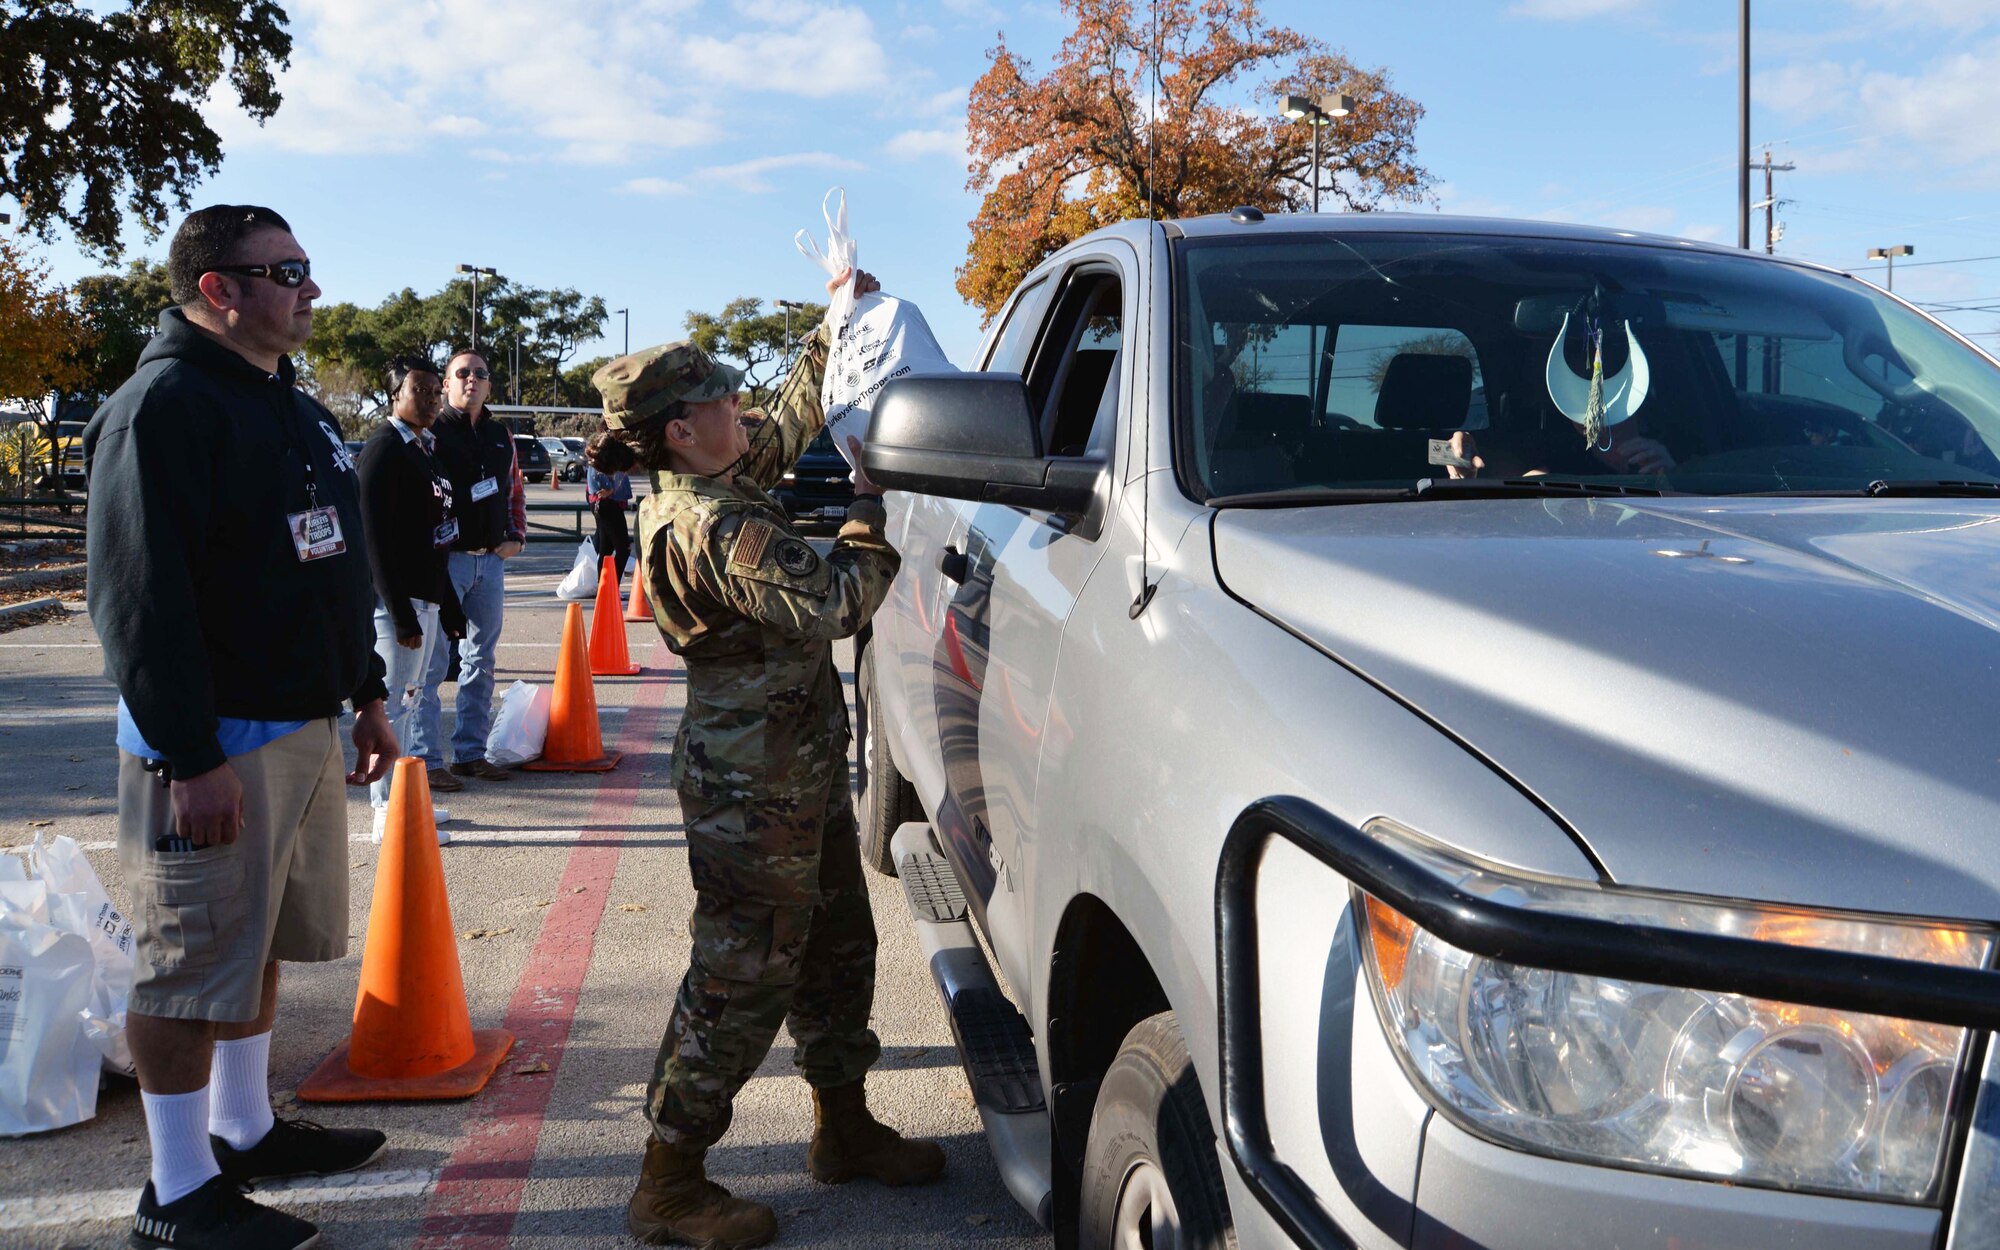 Maj. Jaime Barker, 433rd Civil Engineer Squadron commander, JBSA-Lackland Texas hands a turkey to a military family at the ninth annual Turkeys for Troops event at Toyota of Boerne Nov. 22, 2019 in Boerne, Texas. Nearly 8000 turkeys were given away to military members, veterans, and military families. (U.S. Air Force photo by Master Sgt. Kristian Carter)